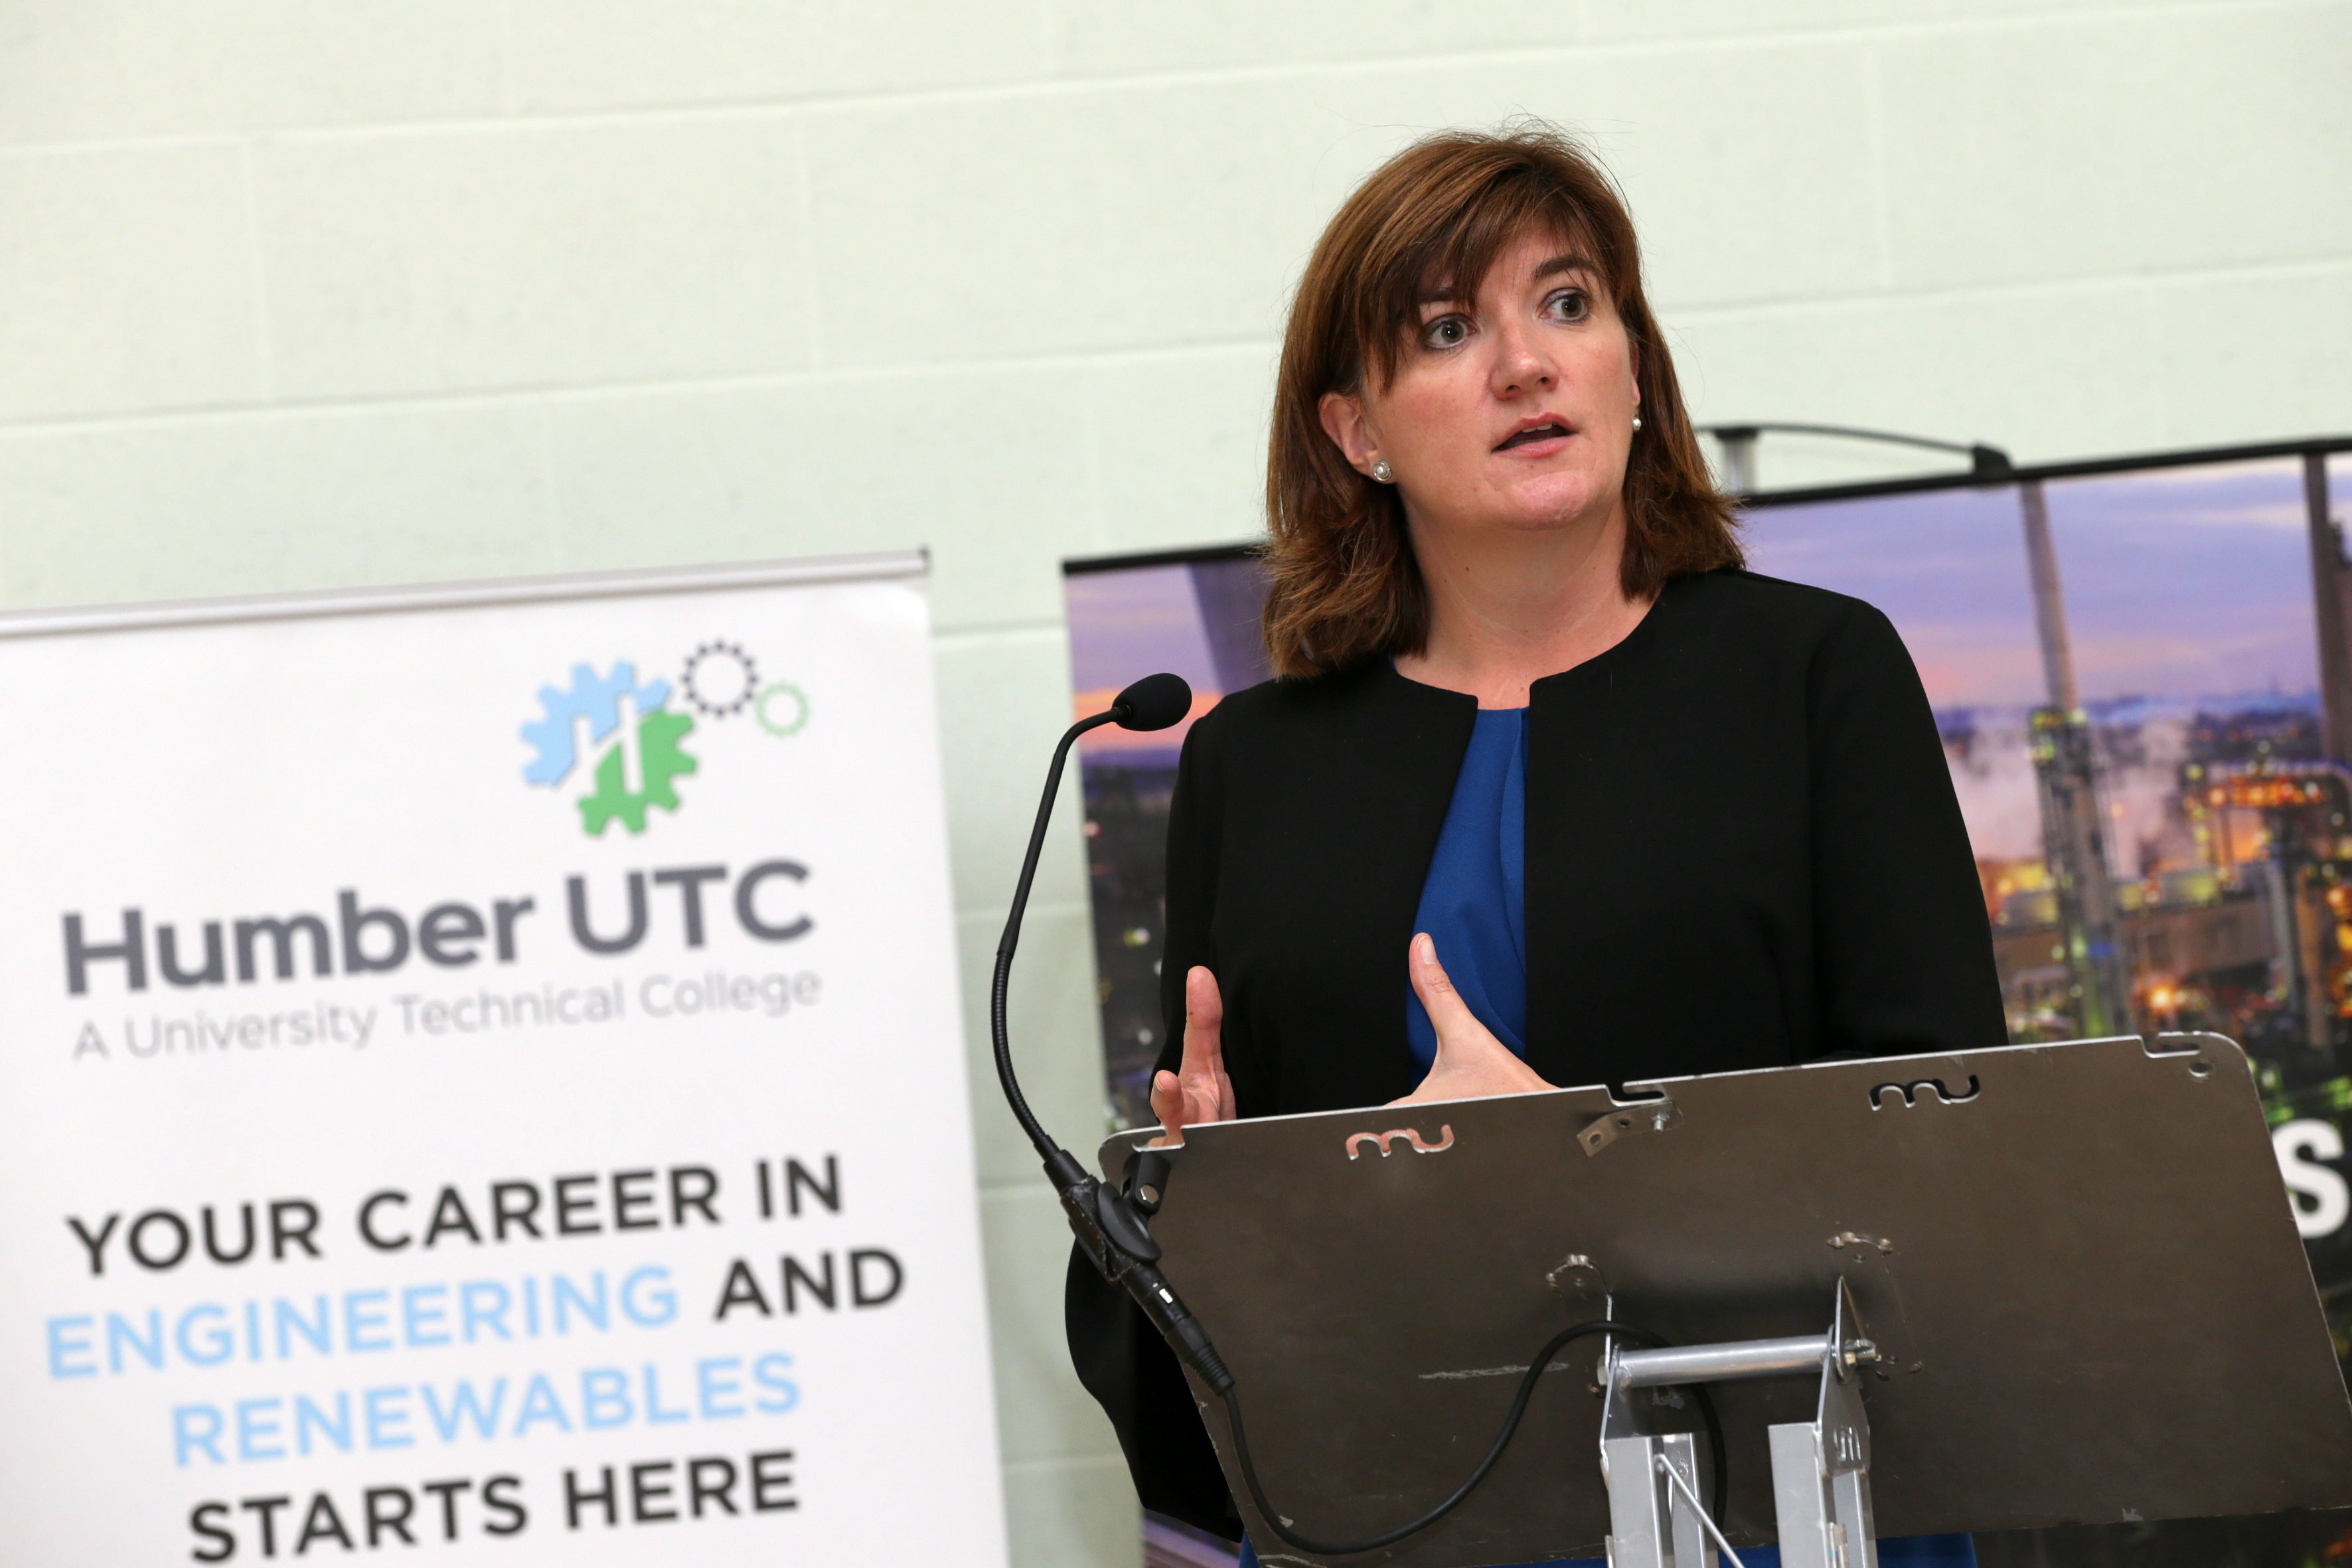 Humber UTC is visited by Rt. Hon Nicky Morgan MP